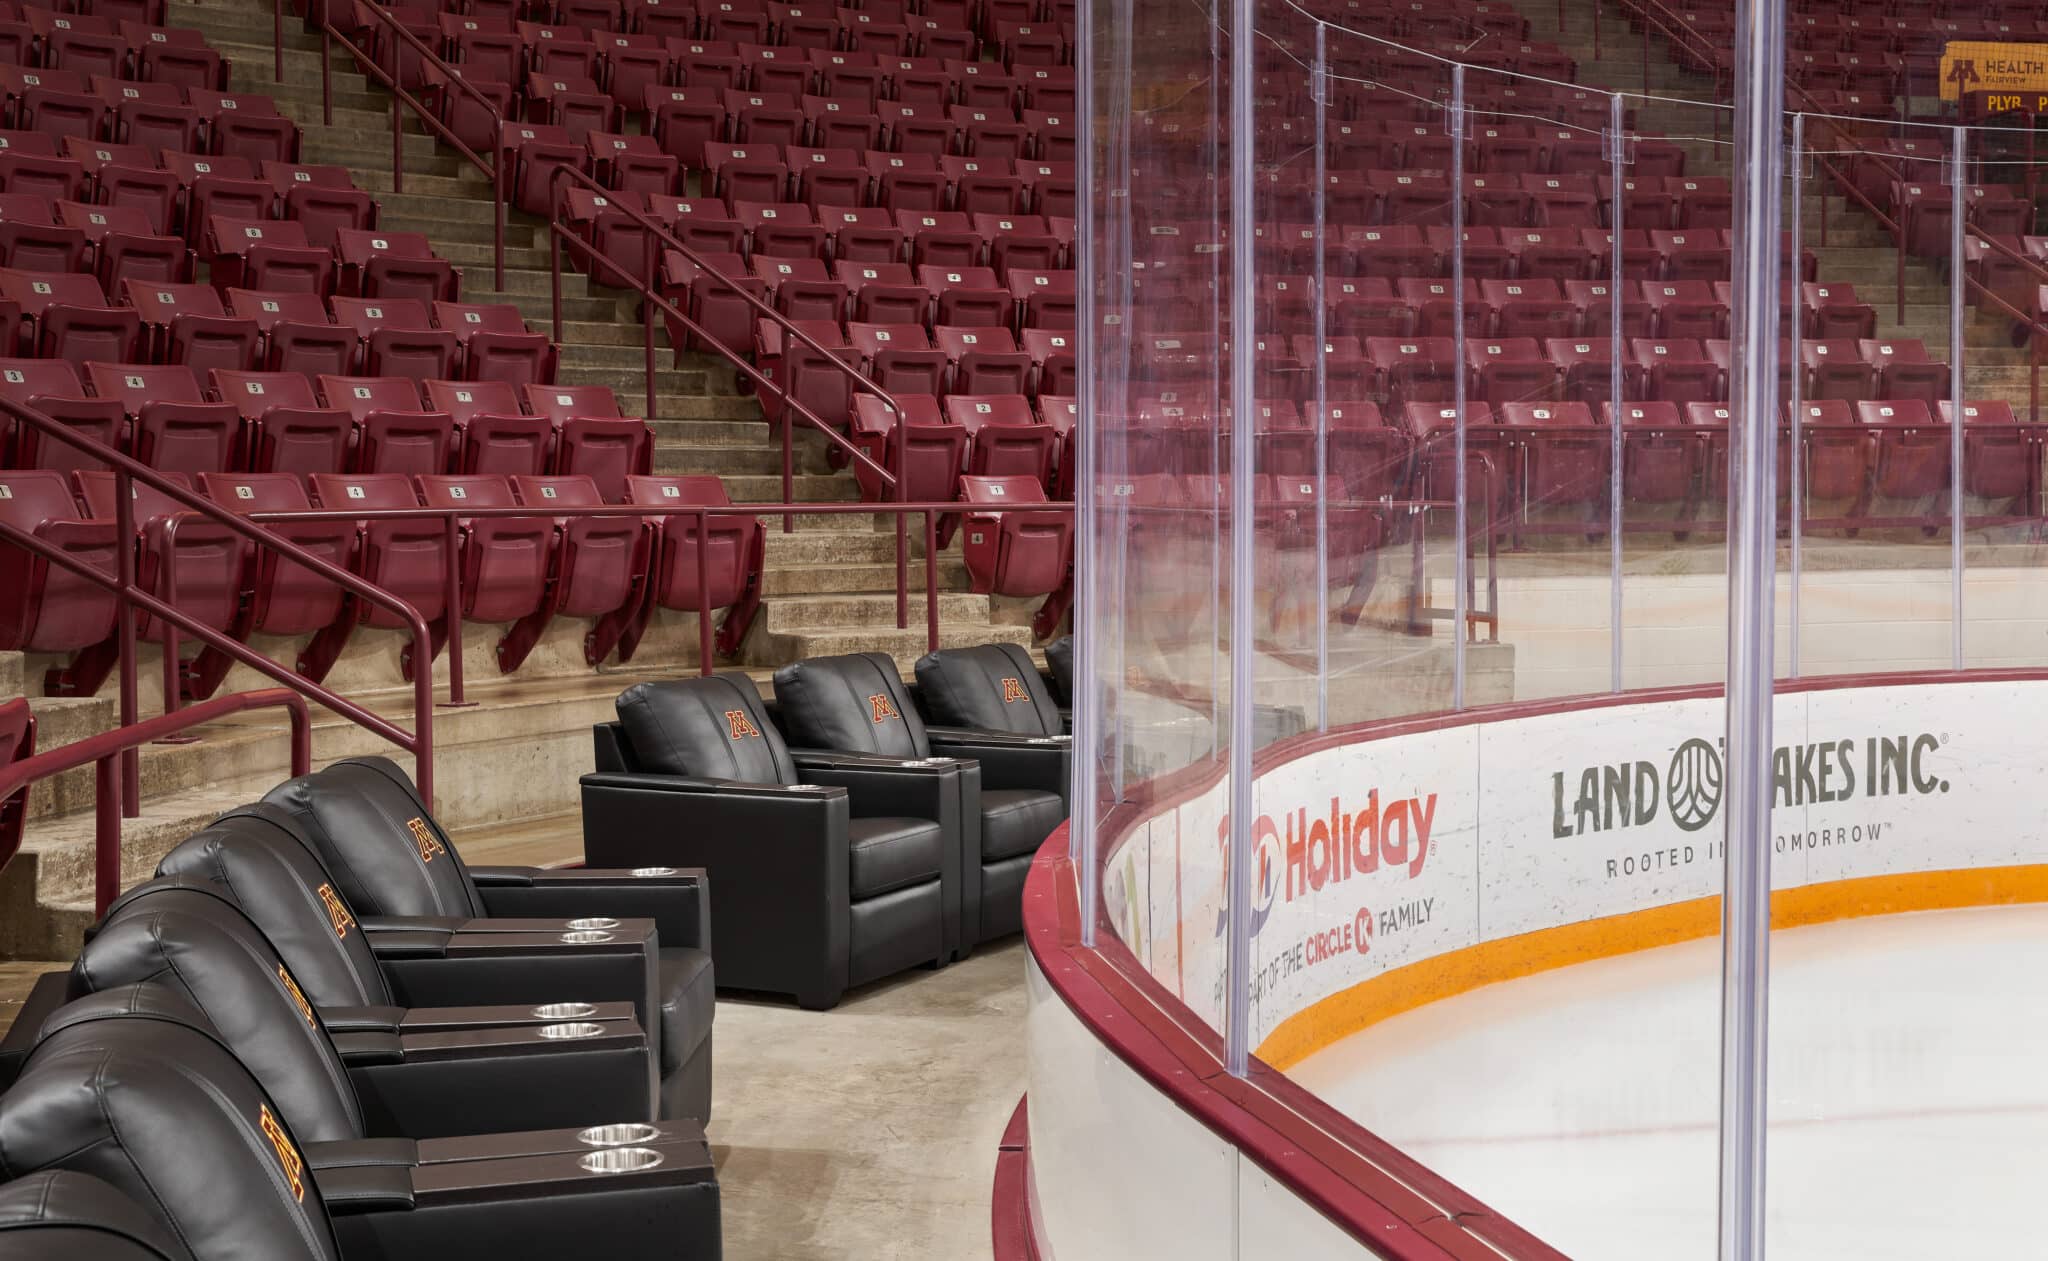 JLG worked with the University of Minnesota to shrink the rink at 3M Arena at Mariucci from an Olympic size sheet to an NHL-hybrid size.